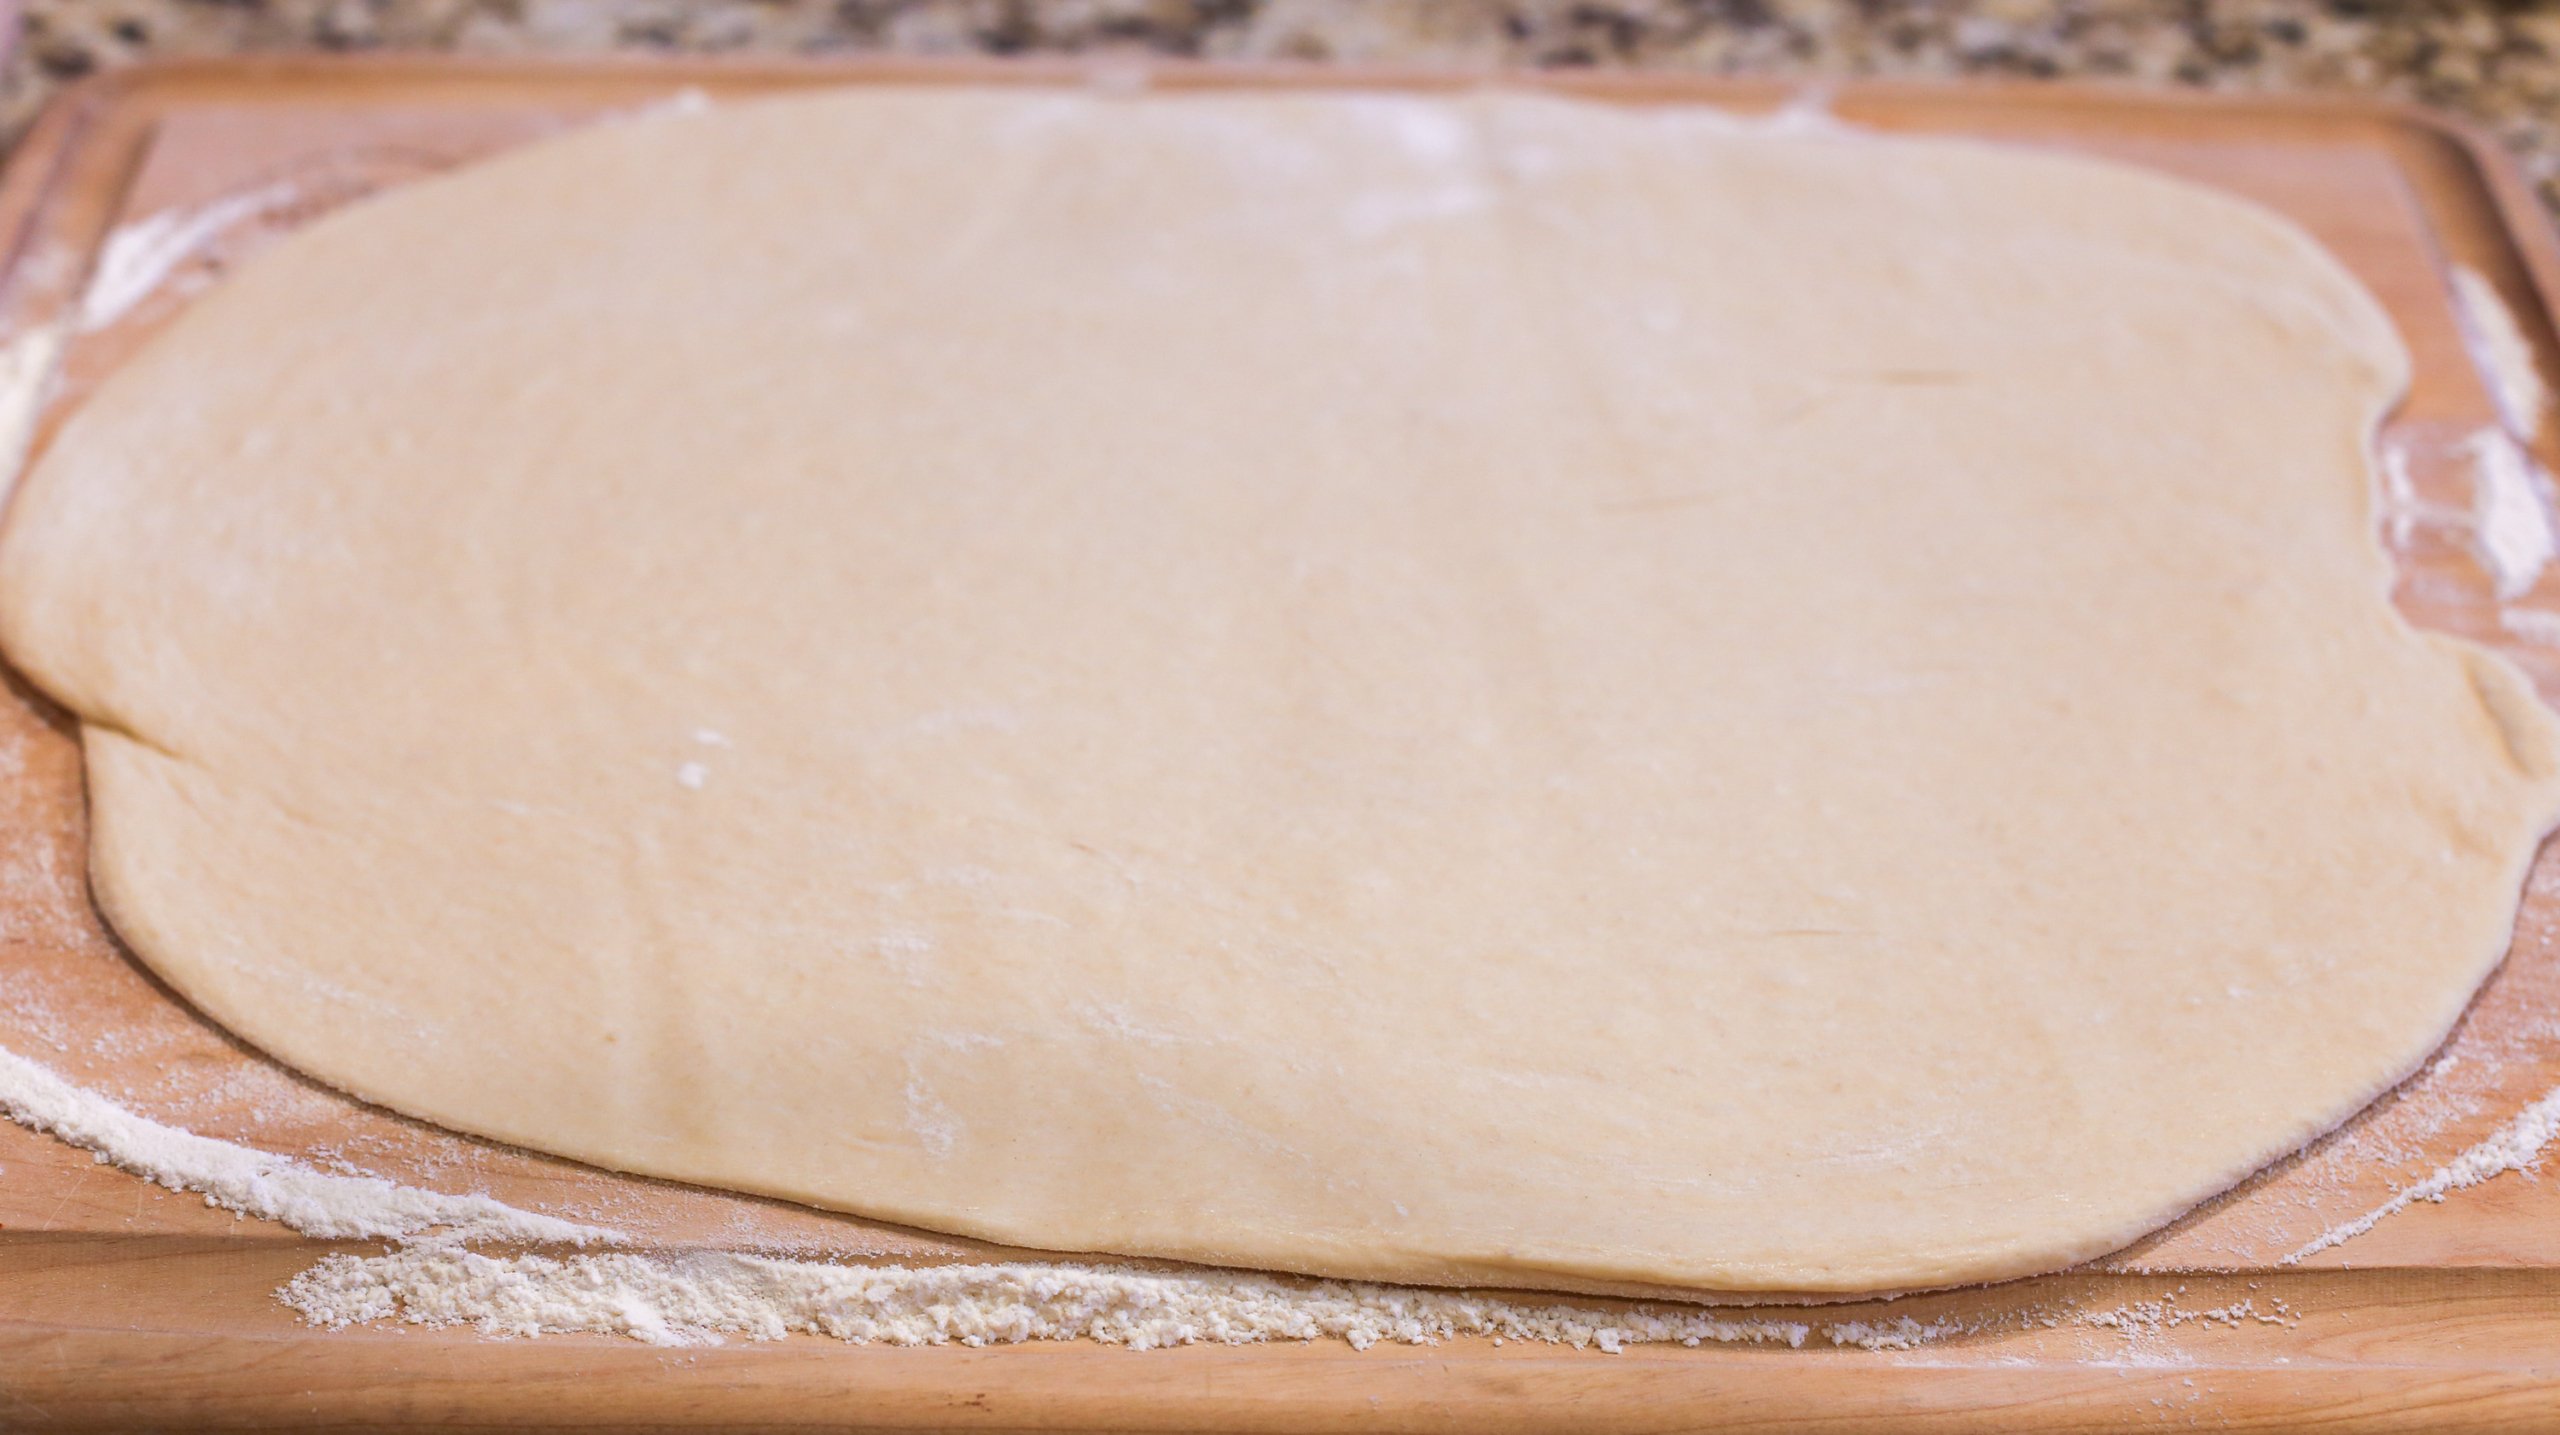 Cinnamon roll dough rolled flat in an oval on wooden cutting board.